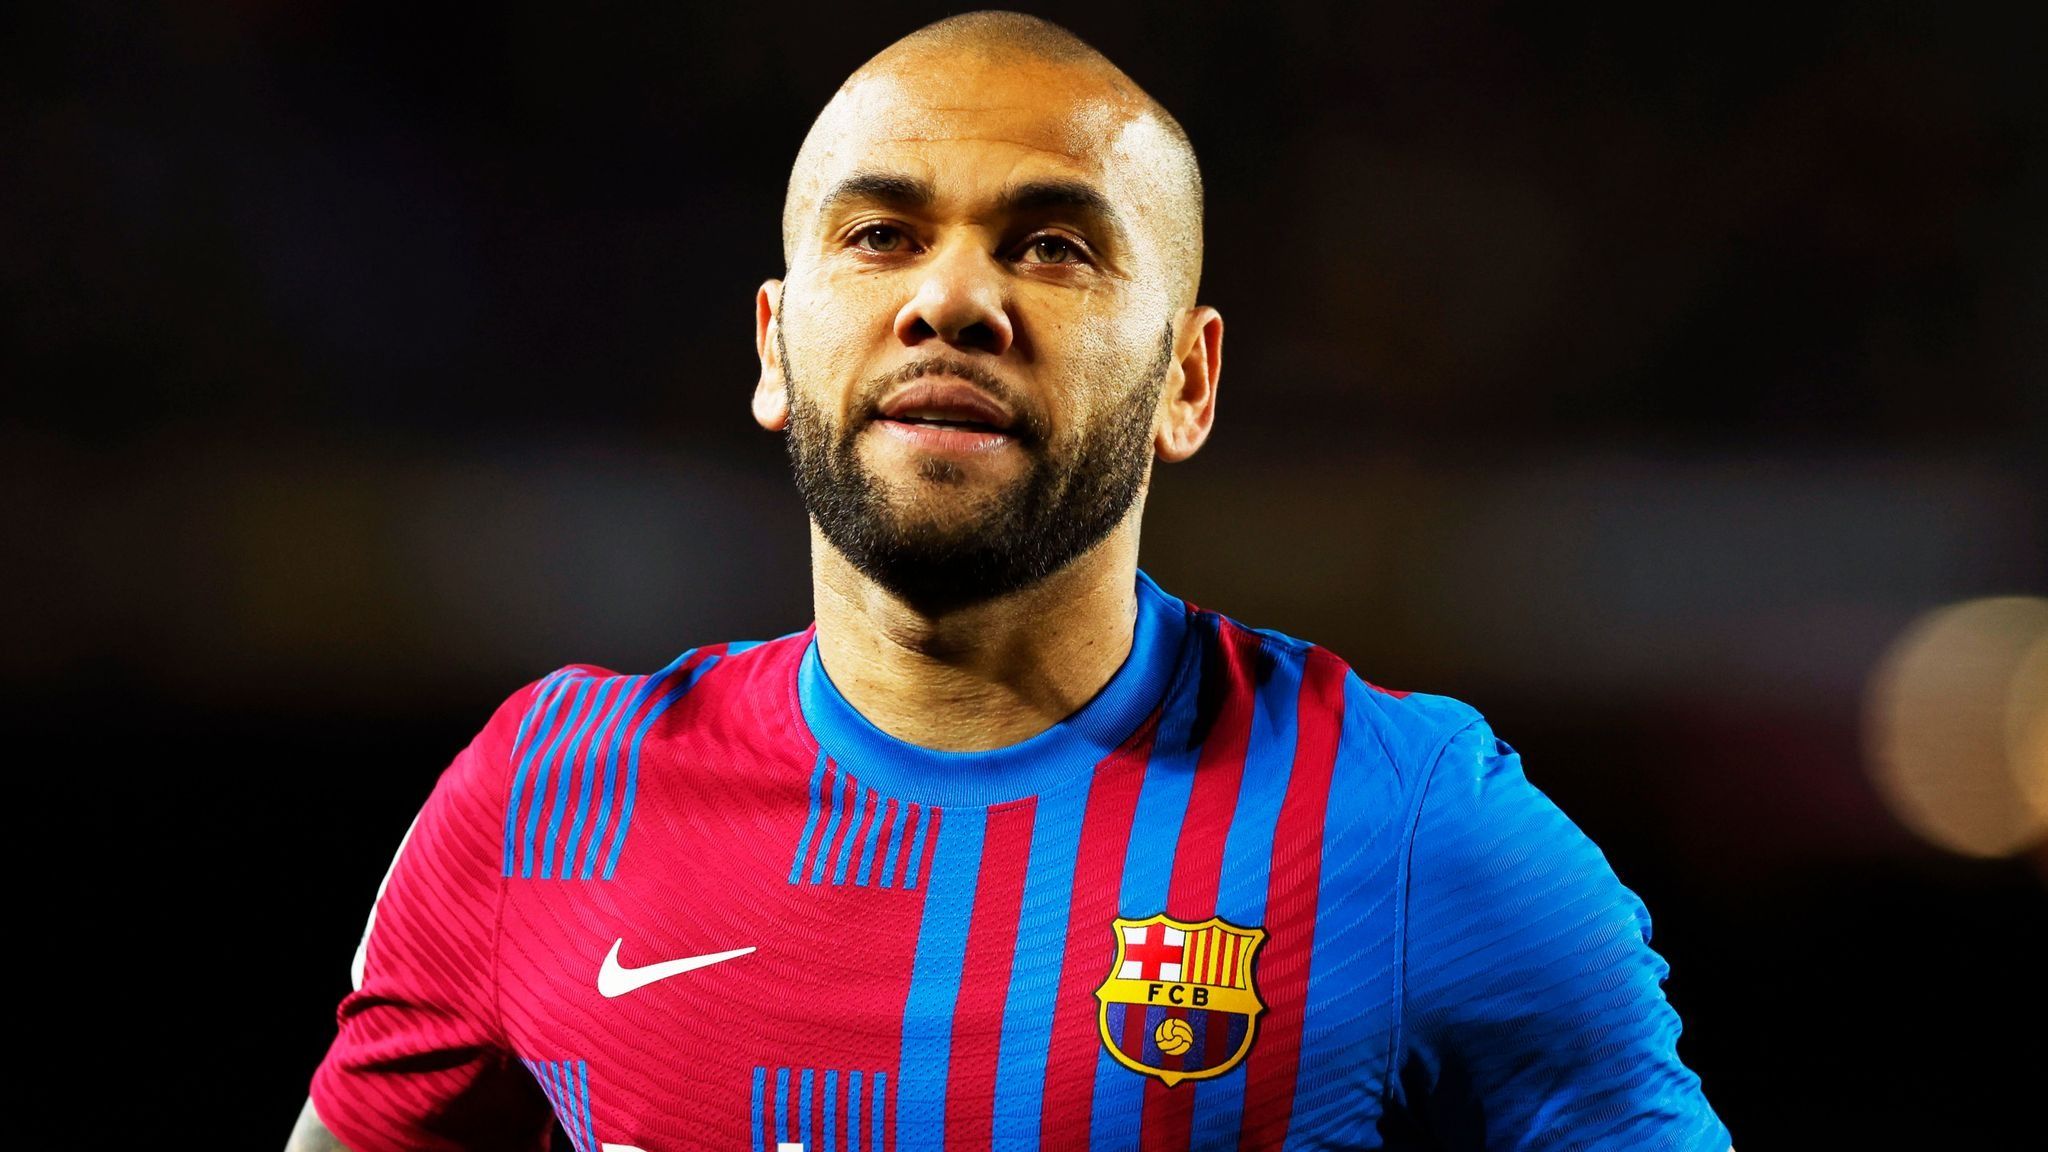 Dani Alves Takes Out Loan To Pay Bail For Bail Money